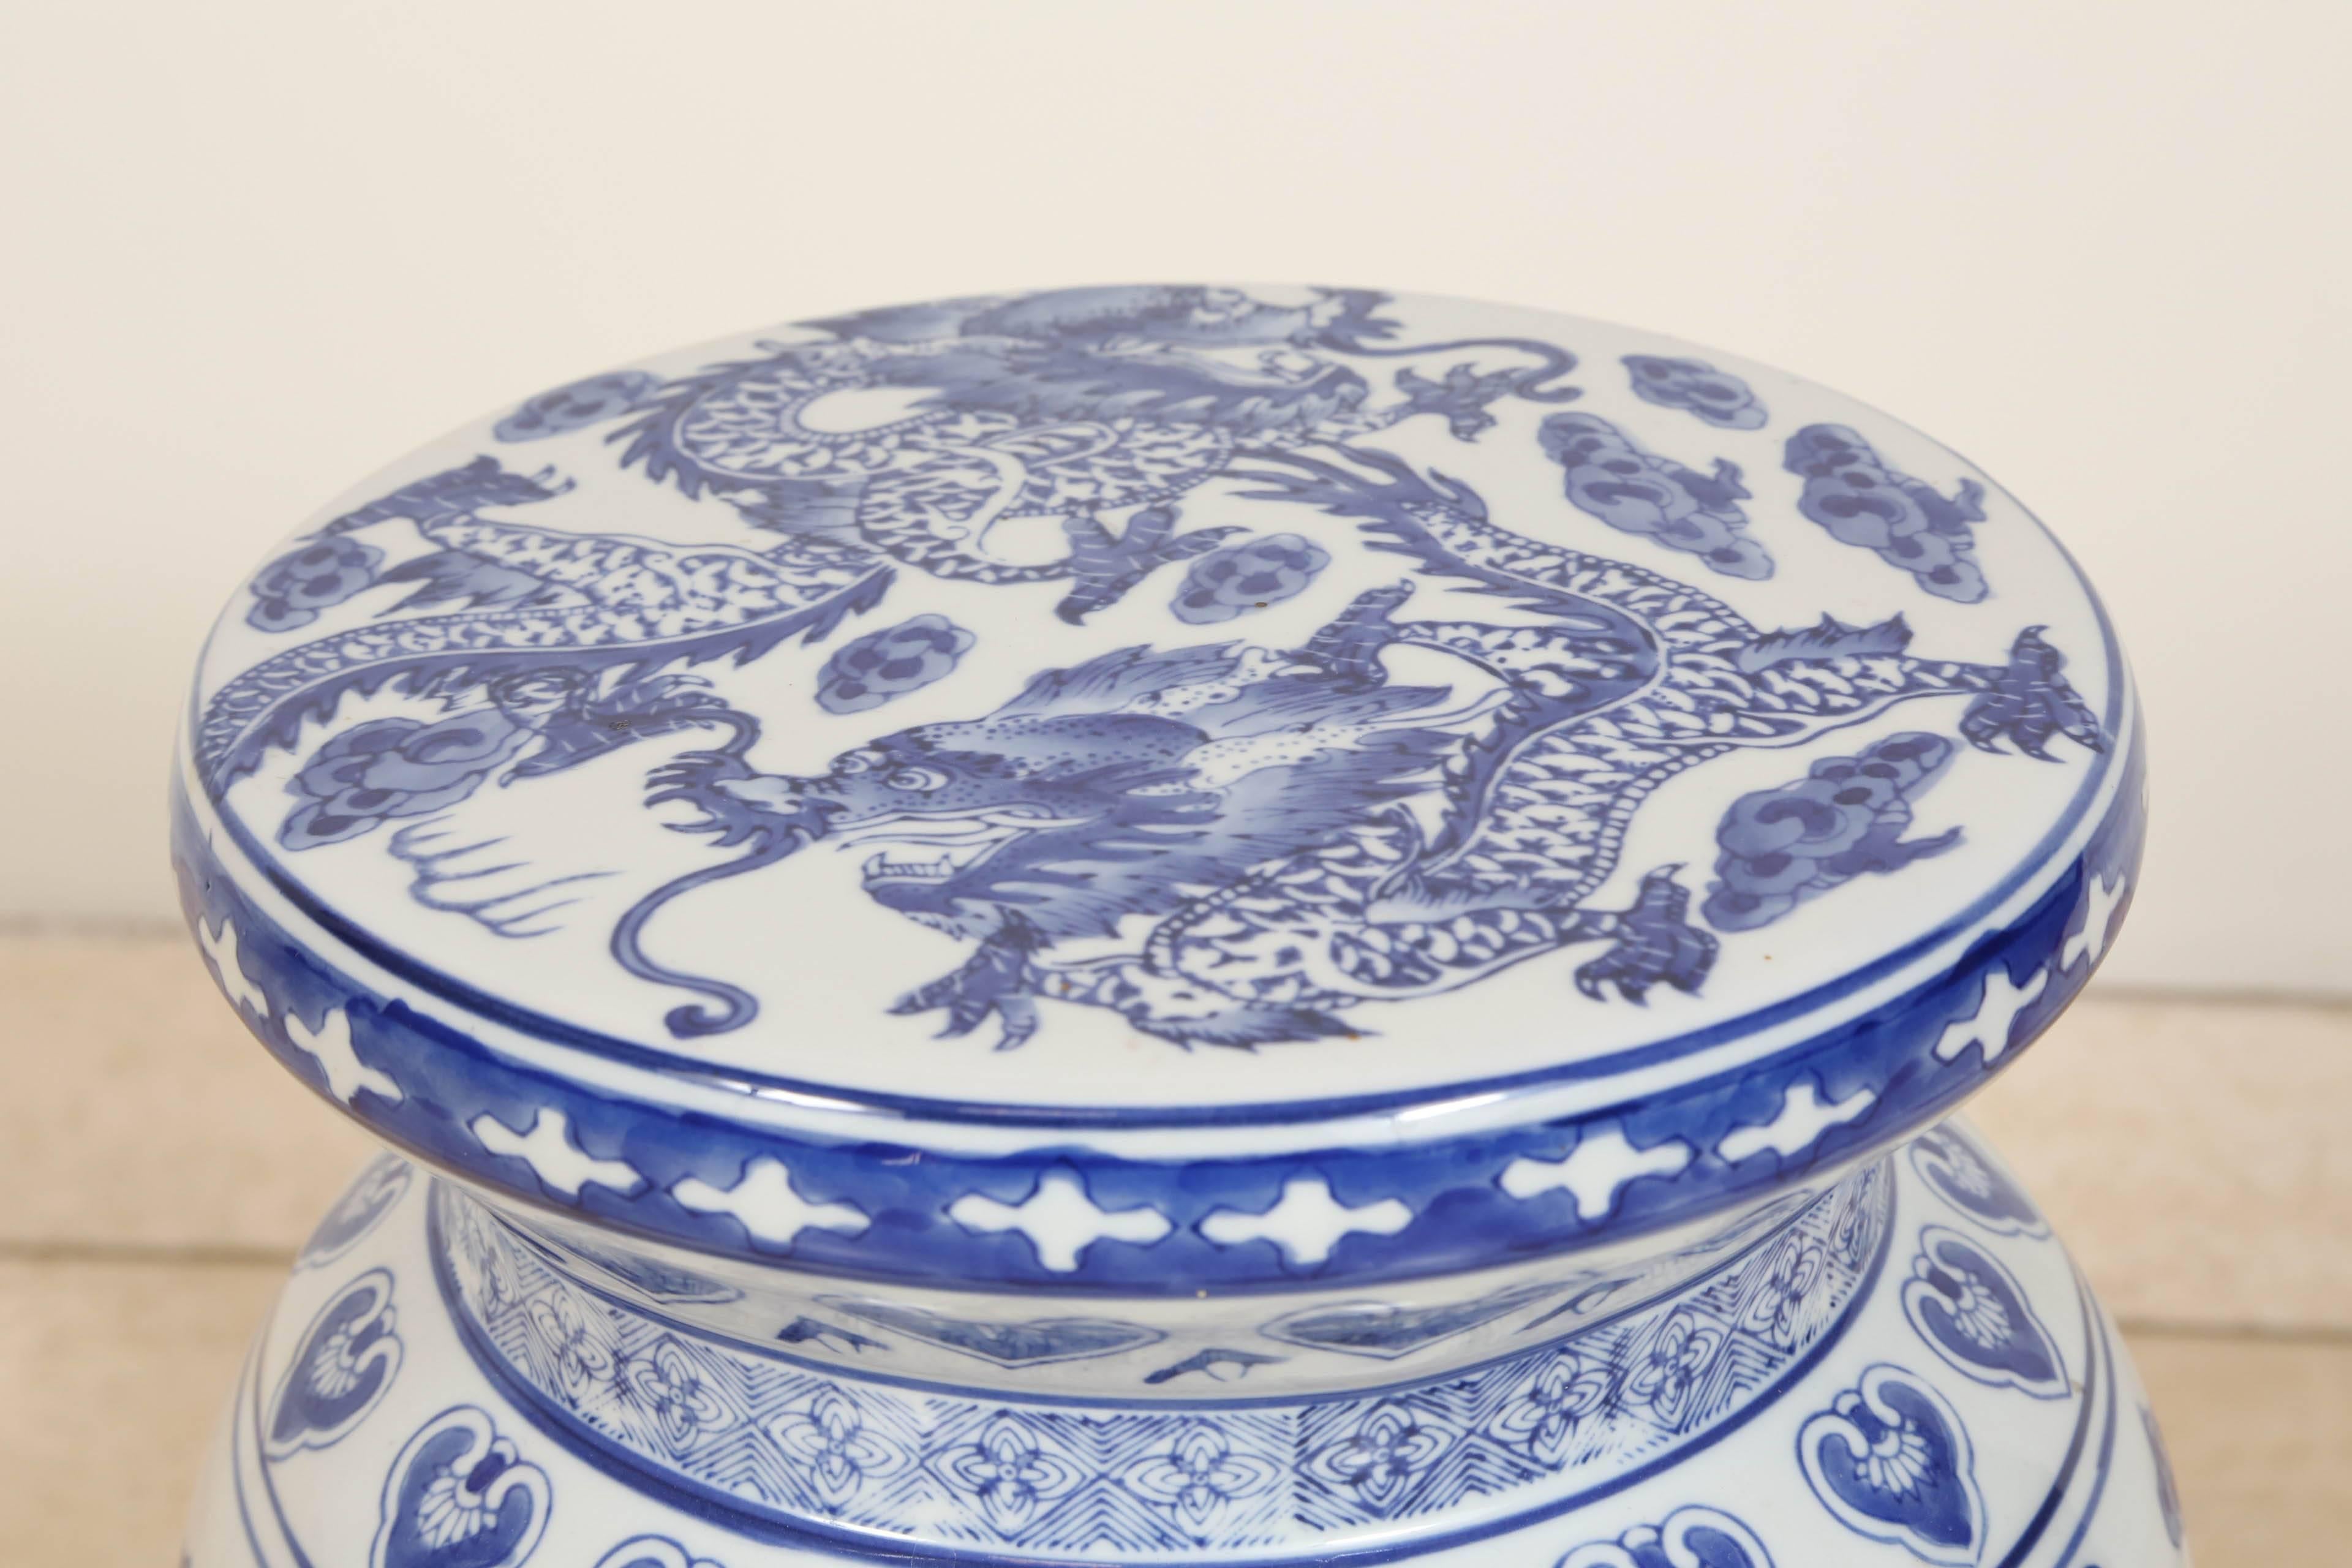 Handcrafted Mid-Century vintage blue and white Chinese ceramic stool with dragons.
Great to use this stool indoor or outdoor as ceramic garden stool, bathroom stool or plant stool.
Light and easy to carry around as an end table or garden